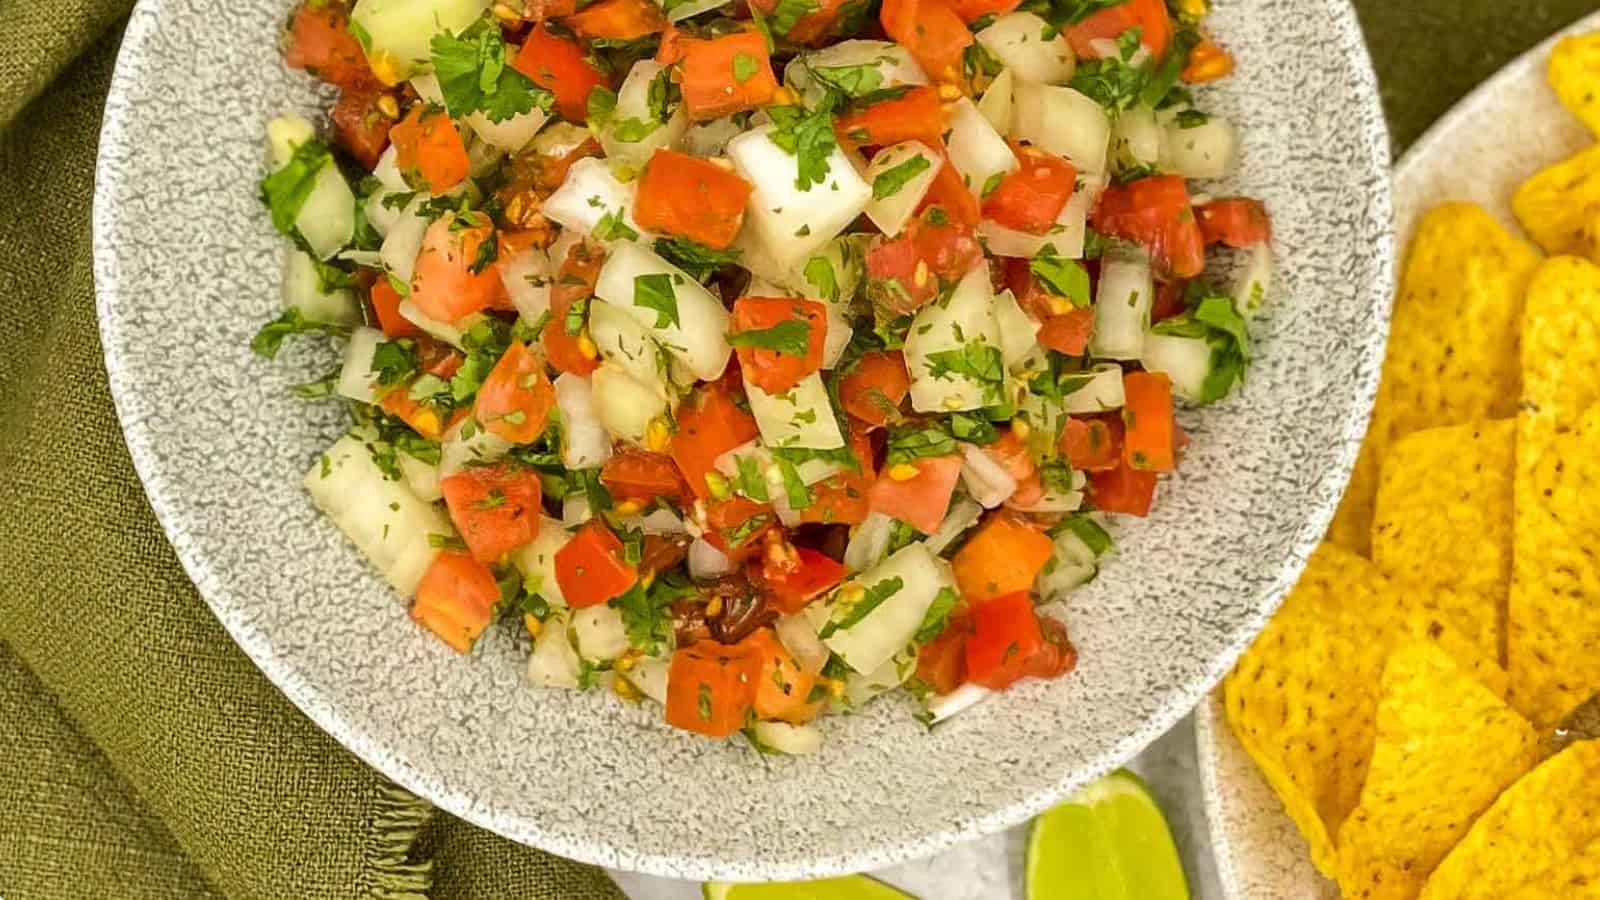 <p>Add some zing to your meals with Pico de Gallo, the classic Mexican condiment that is easy yet tasty. This recipe is refreshing, tangy, and flavorful and is Made with juicy tomatoes, onions, cilantro, and lime juice. Serve it as a topping for tacos, or grilled chicken, or enjoy it with tortilla chips as a snack.<br><strong>Get the Recipe: </strong><a href="https://www.splashoftaste.com/pico-de-gallo/?utm_source=msn&utm_medium=page&utm_campaign=msn">Pico de Gallo</a></p> <p>The post <a rel="nofollow" href="https://www.splashoftaste.com/ay-chihuahua-so-easy-yet-so-tasty-forget-the-restaurante/">¡Ay Chihuahua! So Easy Yet So Tasty, Forget The Restaurante!</a> appeared first on <a rel="nofollow" href="https://www.splashoftaste.com">Splash of Taste - Vegetarian Recipes</a>.</p>